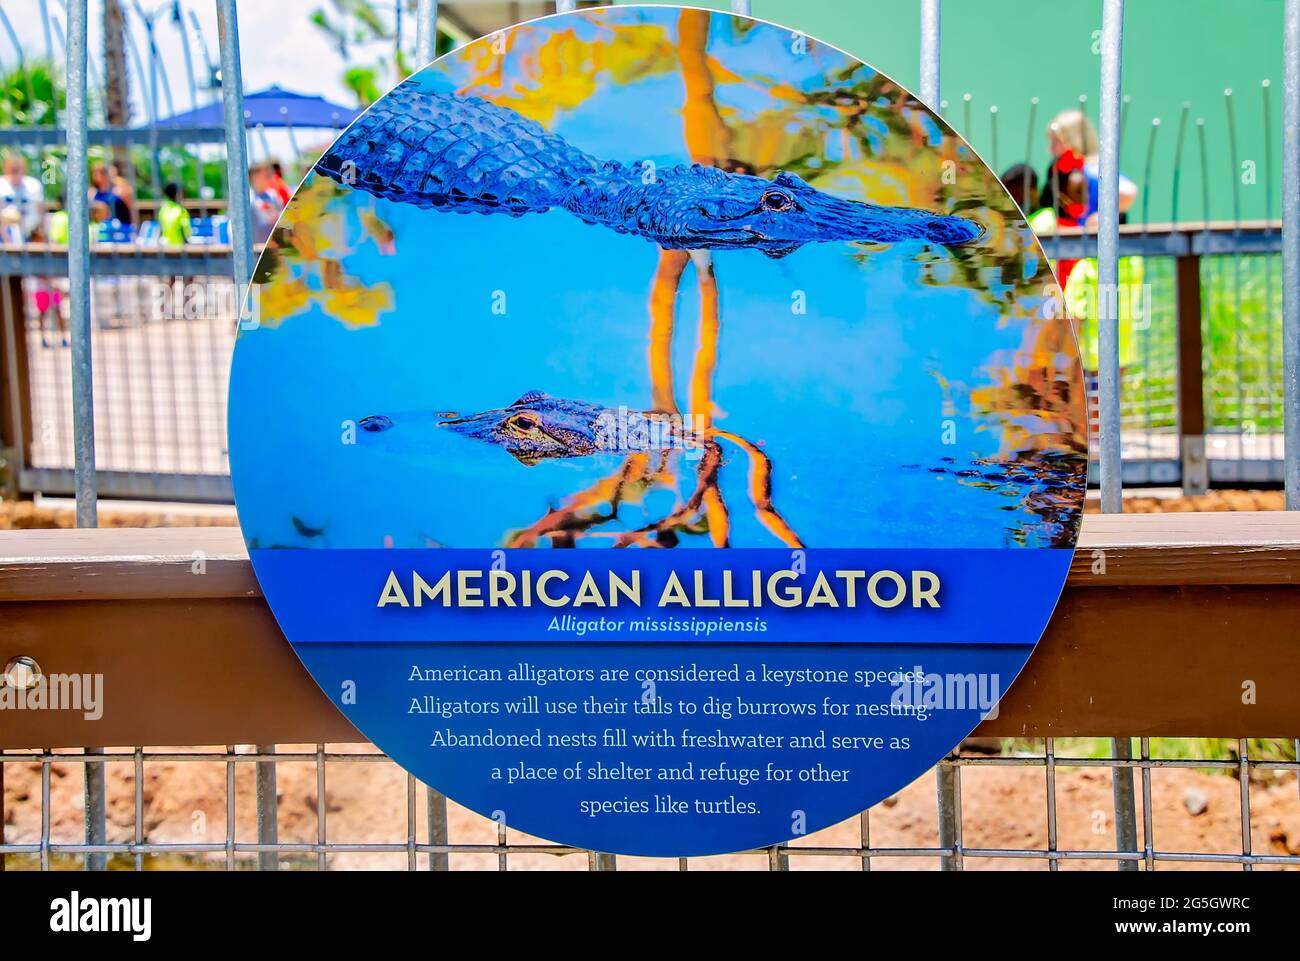 A sign gives information about the American alligator at Mississippi Aquarium, June 24, 2021, in Gulfport, Mississippi. Stock Photo